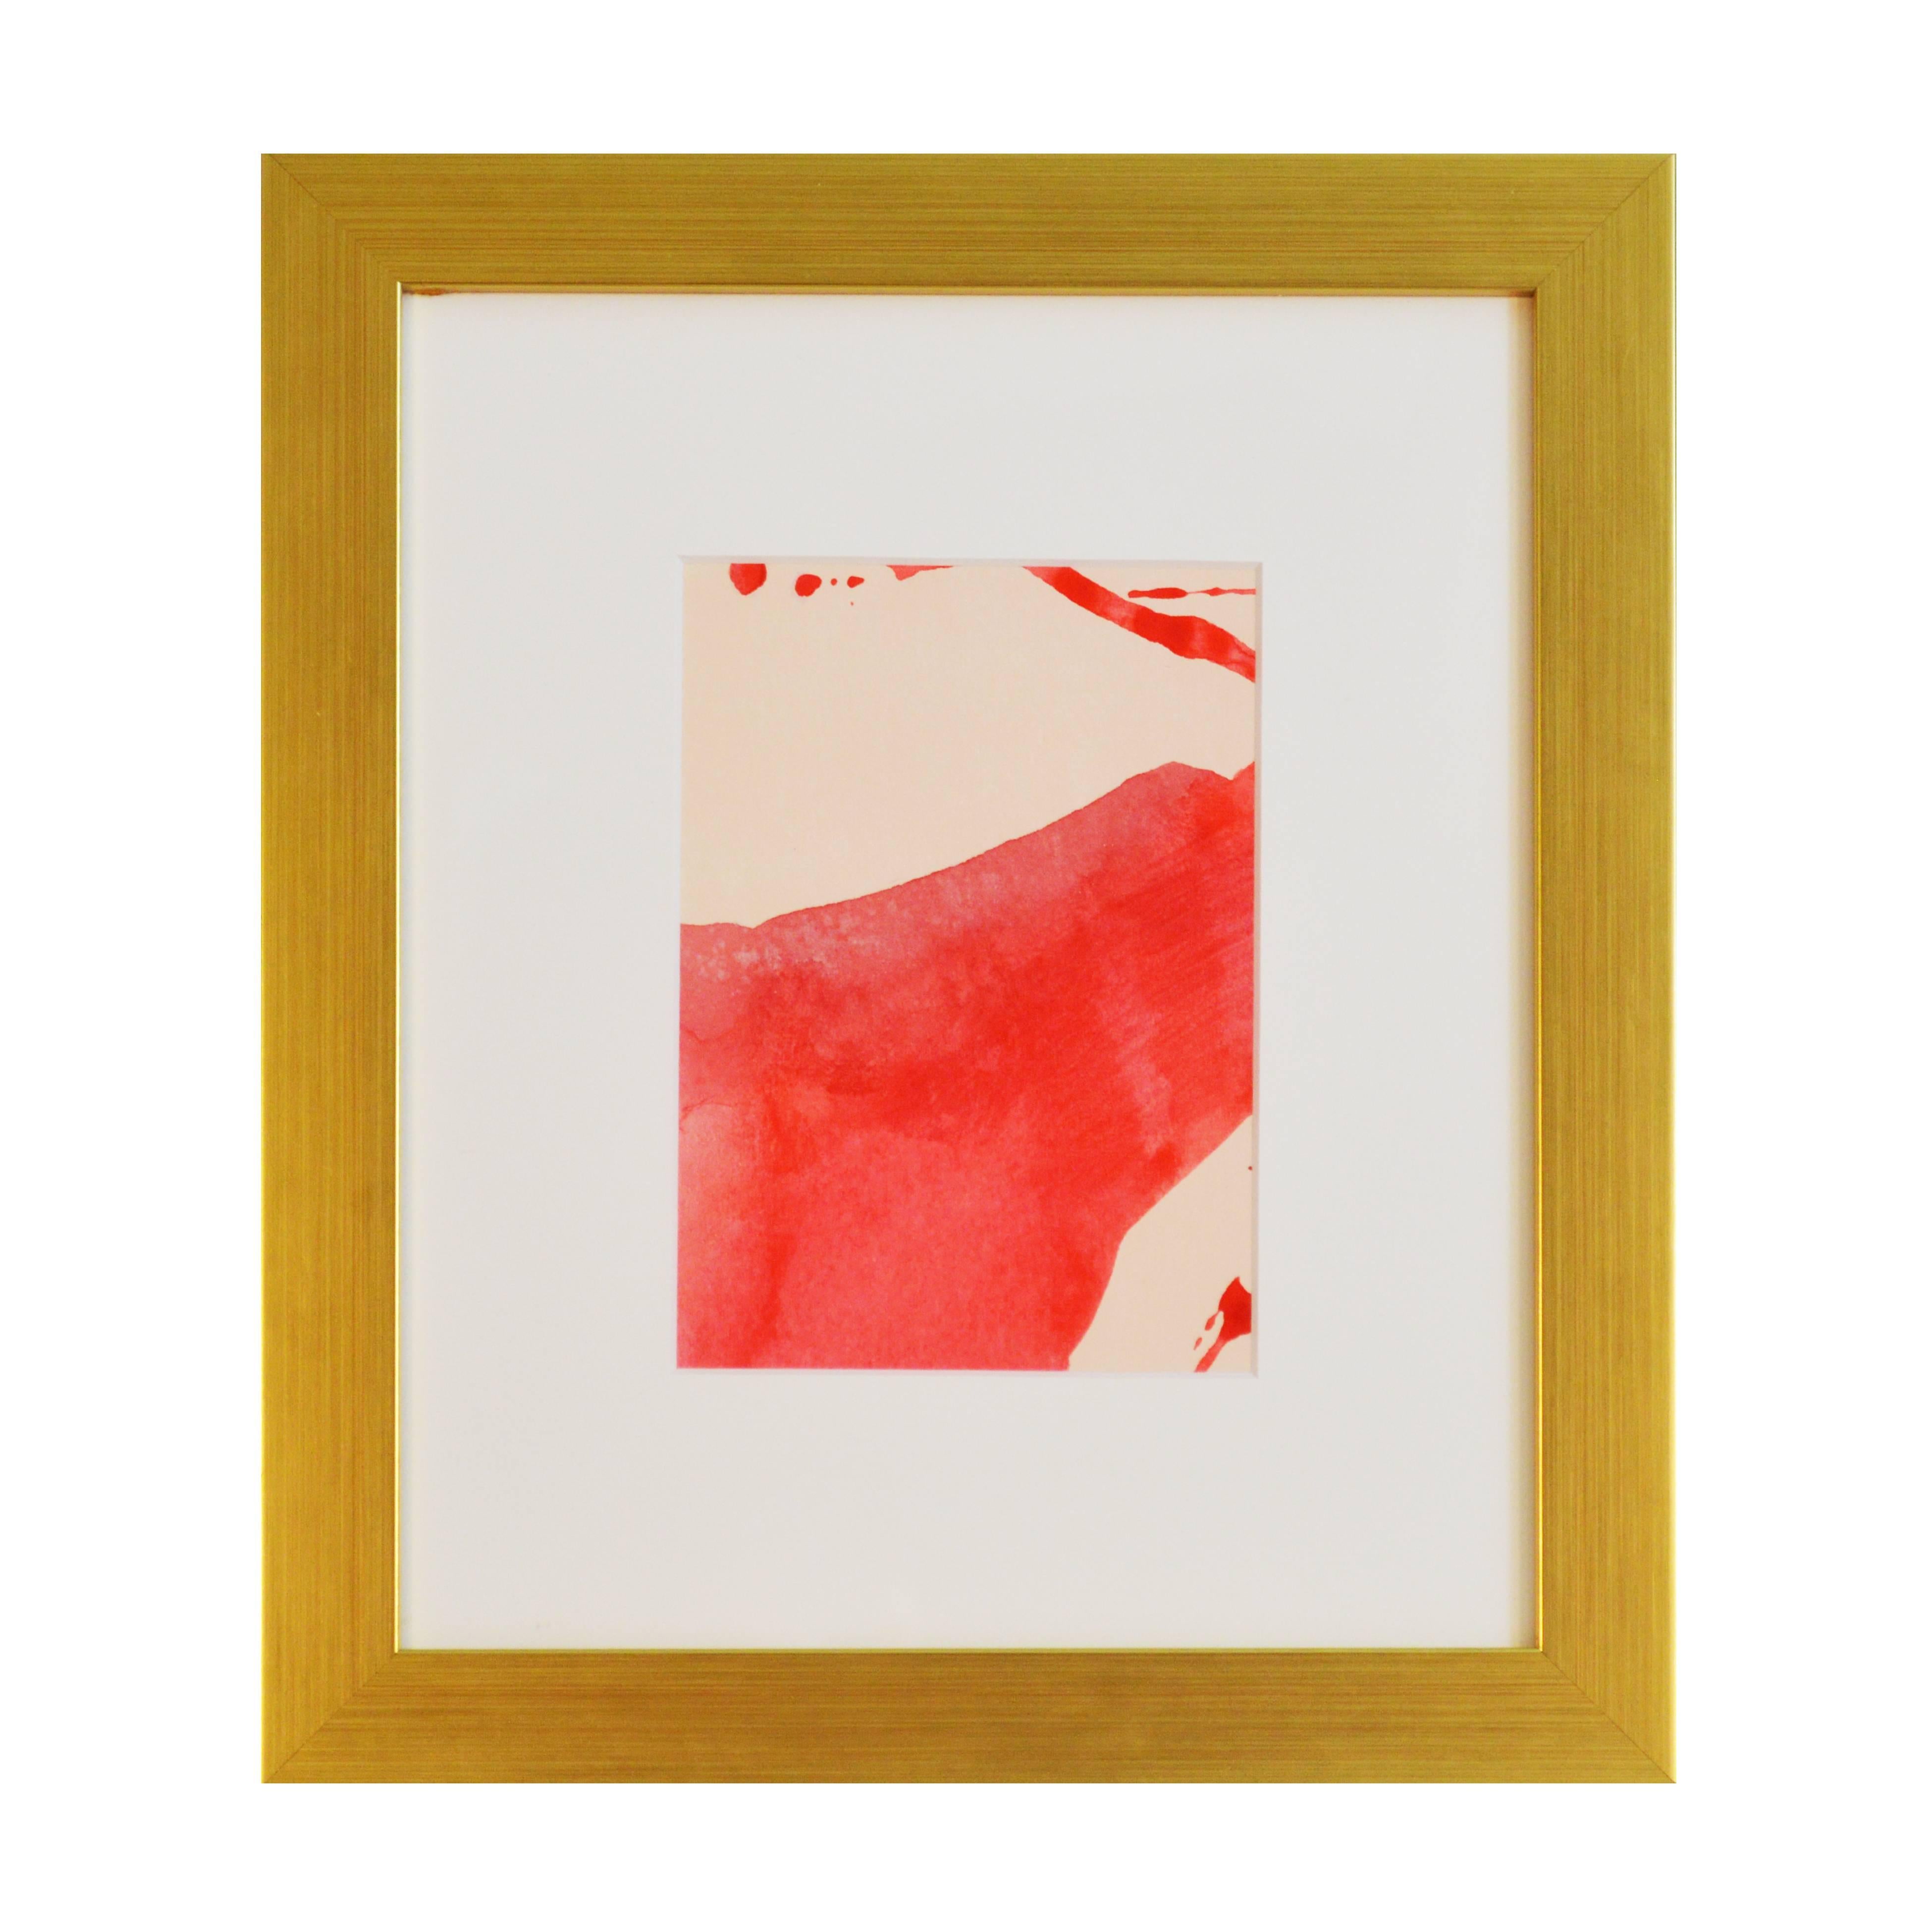 Unique Handmade Contemporary Framed Abstract Painting on Paper with Acrylic Ink For Sale